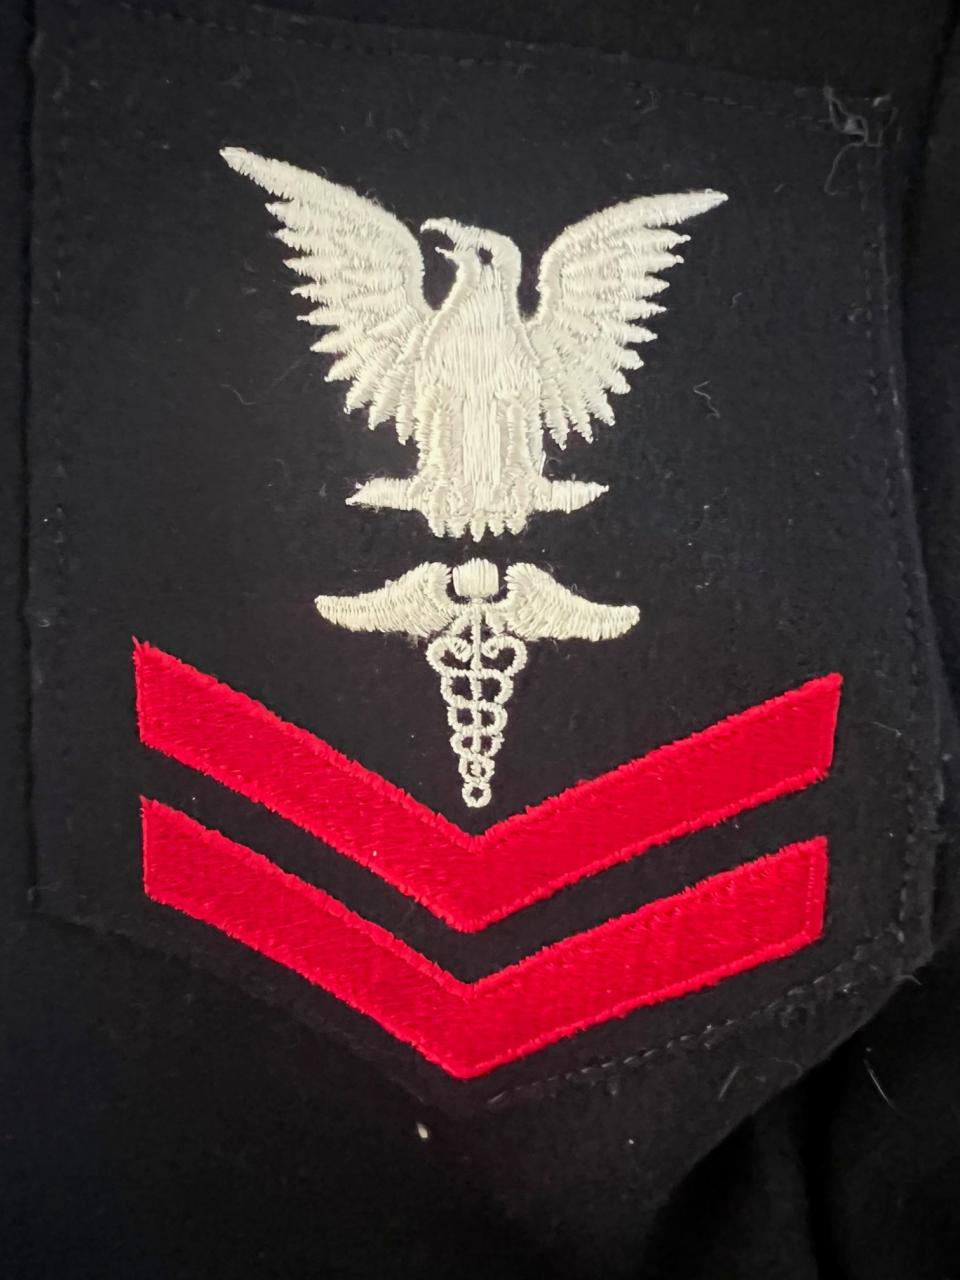 Of the approximately 10,000 Navy hospital corpsmen who served as medics with the Marine Corps between 1965 and 1974, more than 3,000 were wounded and 645 killed.